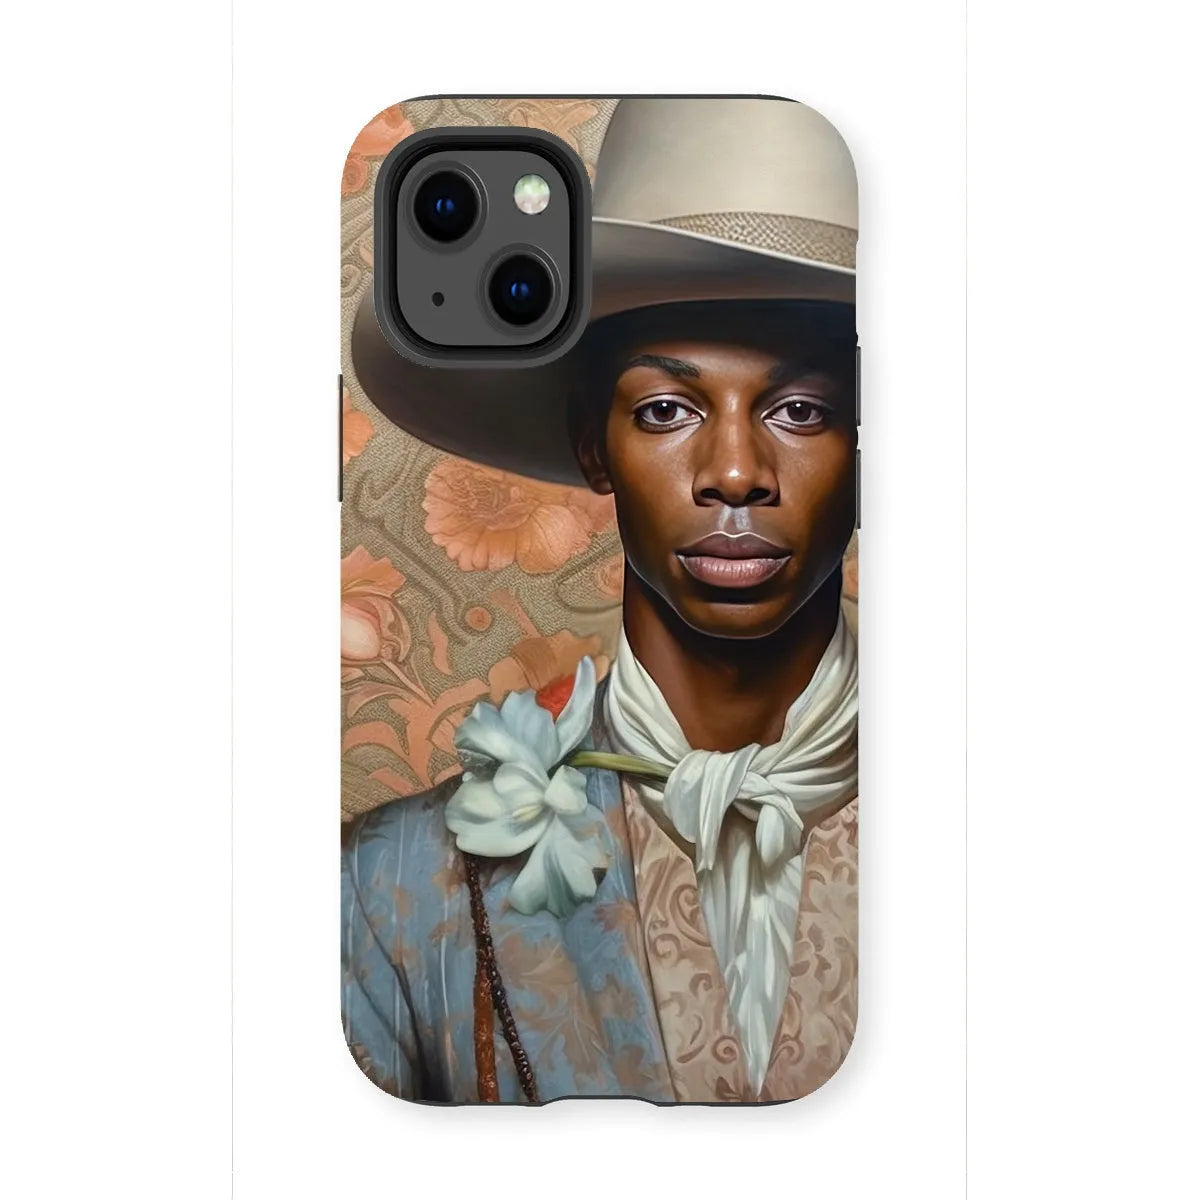 Apollo The Gay Cowboy - Gay Aesthetic Art Phone Case - Iphone 13 Mini / Matte - Mobile Phone Cases - Aesthetic Art